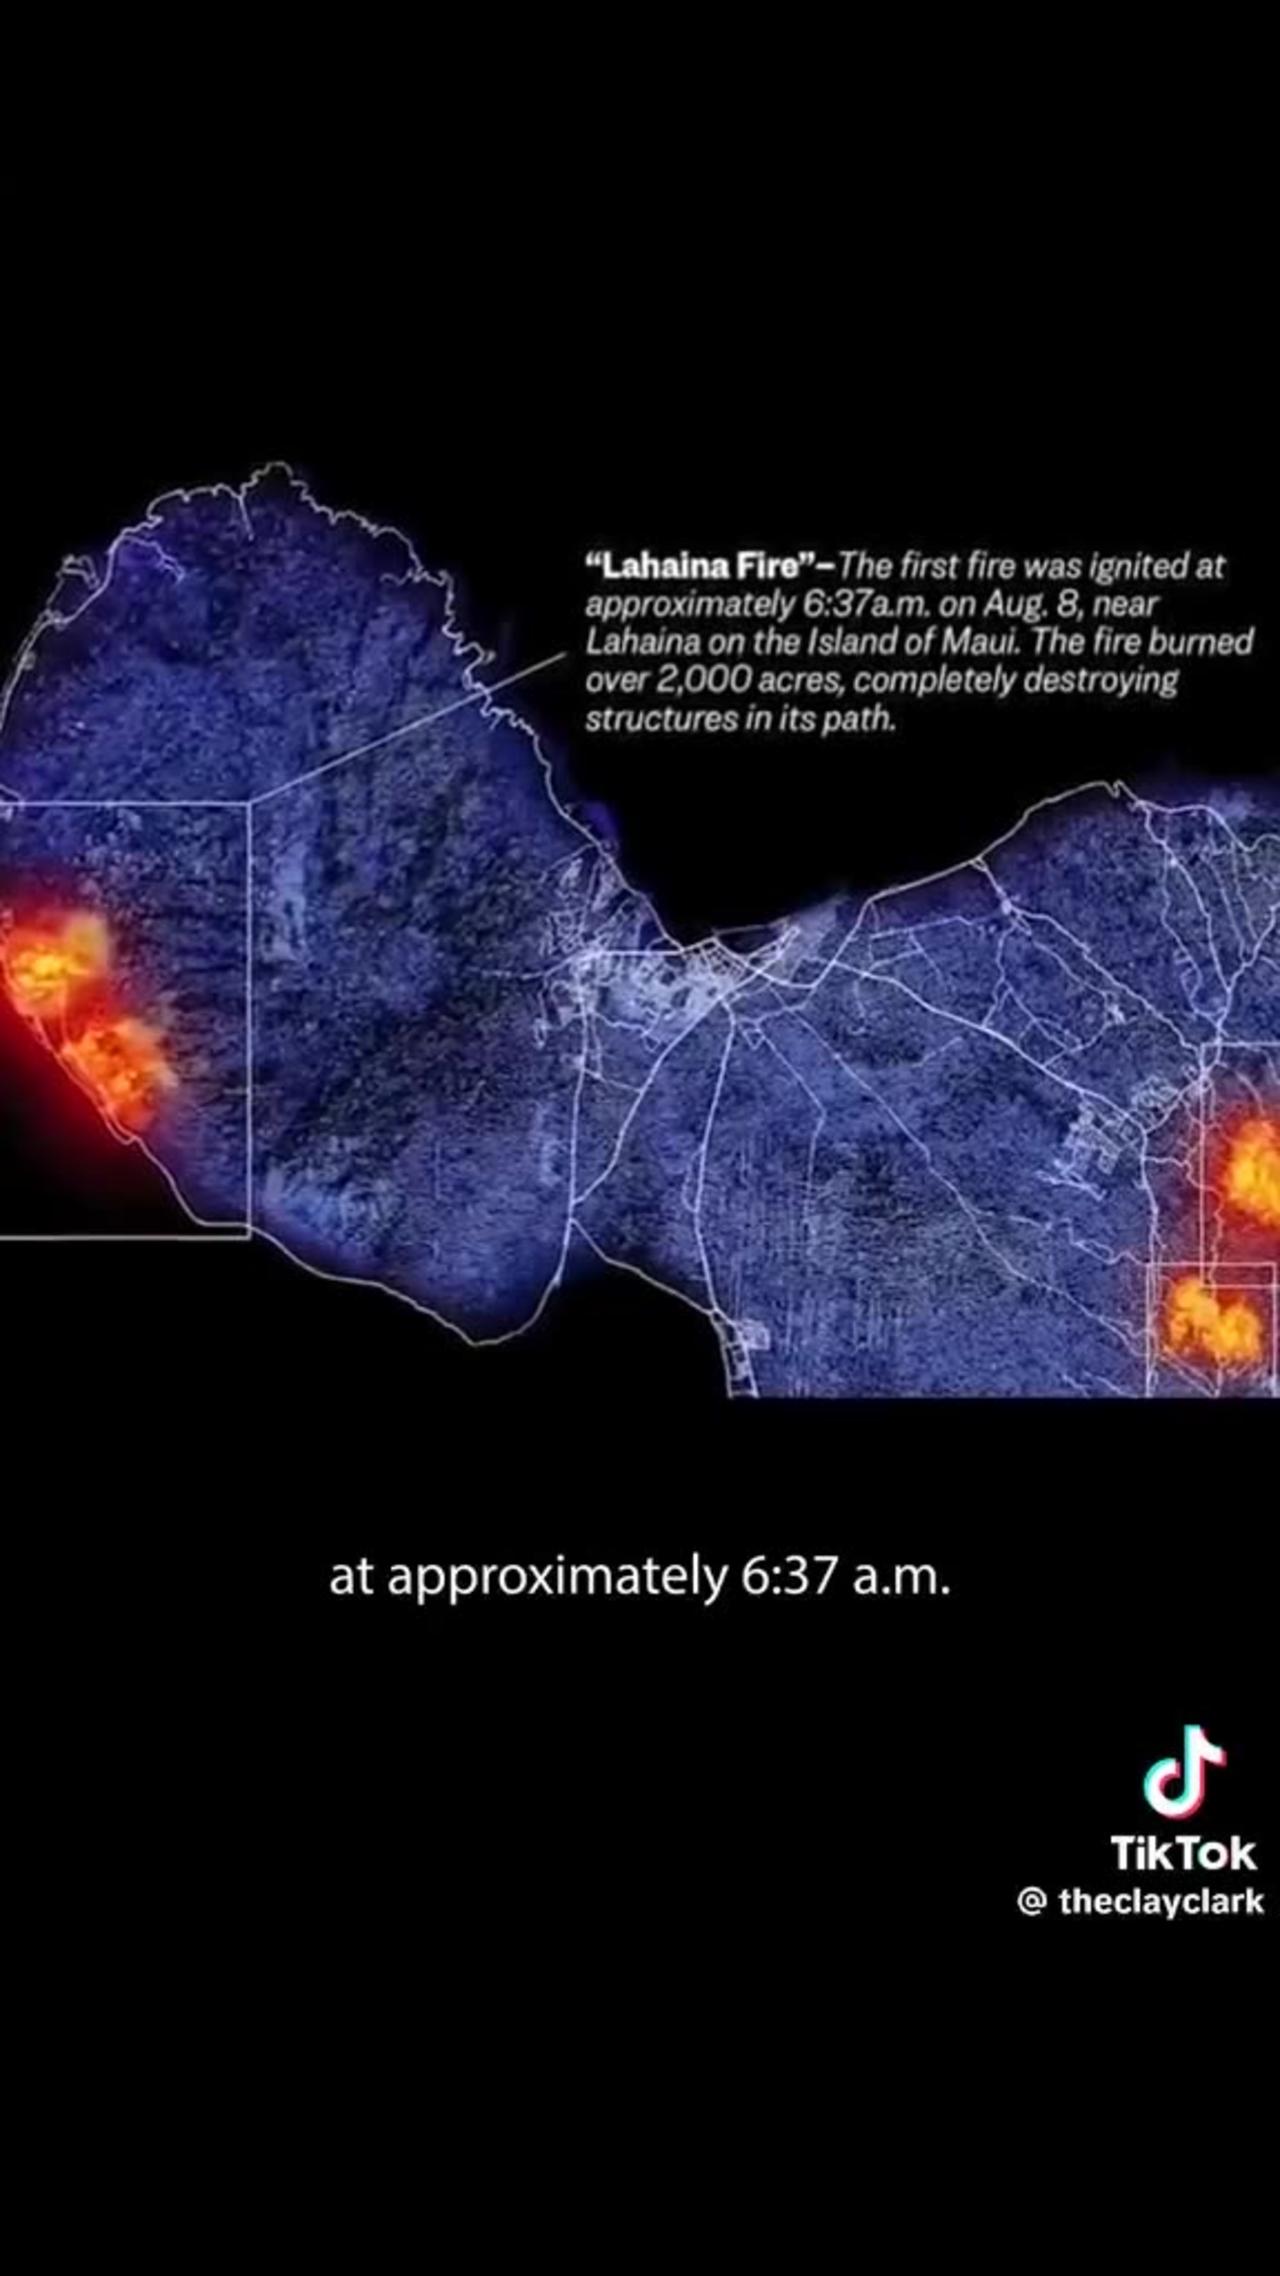 The Video Shows the Position of the Satellites When the Fires Started